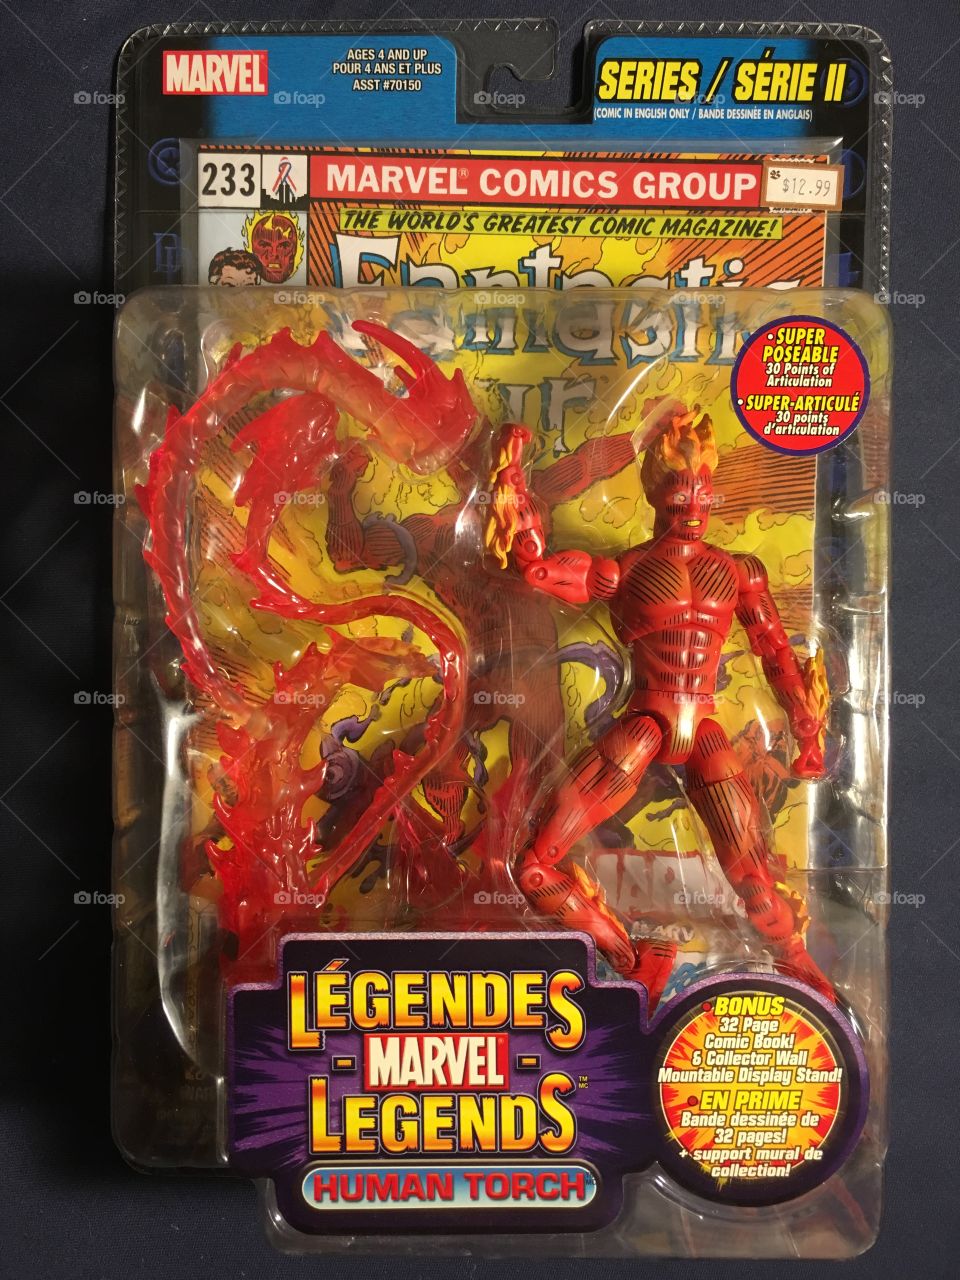 Human Torch - Marvel Legends -Series 2 - Action Figure 
Released - 2002